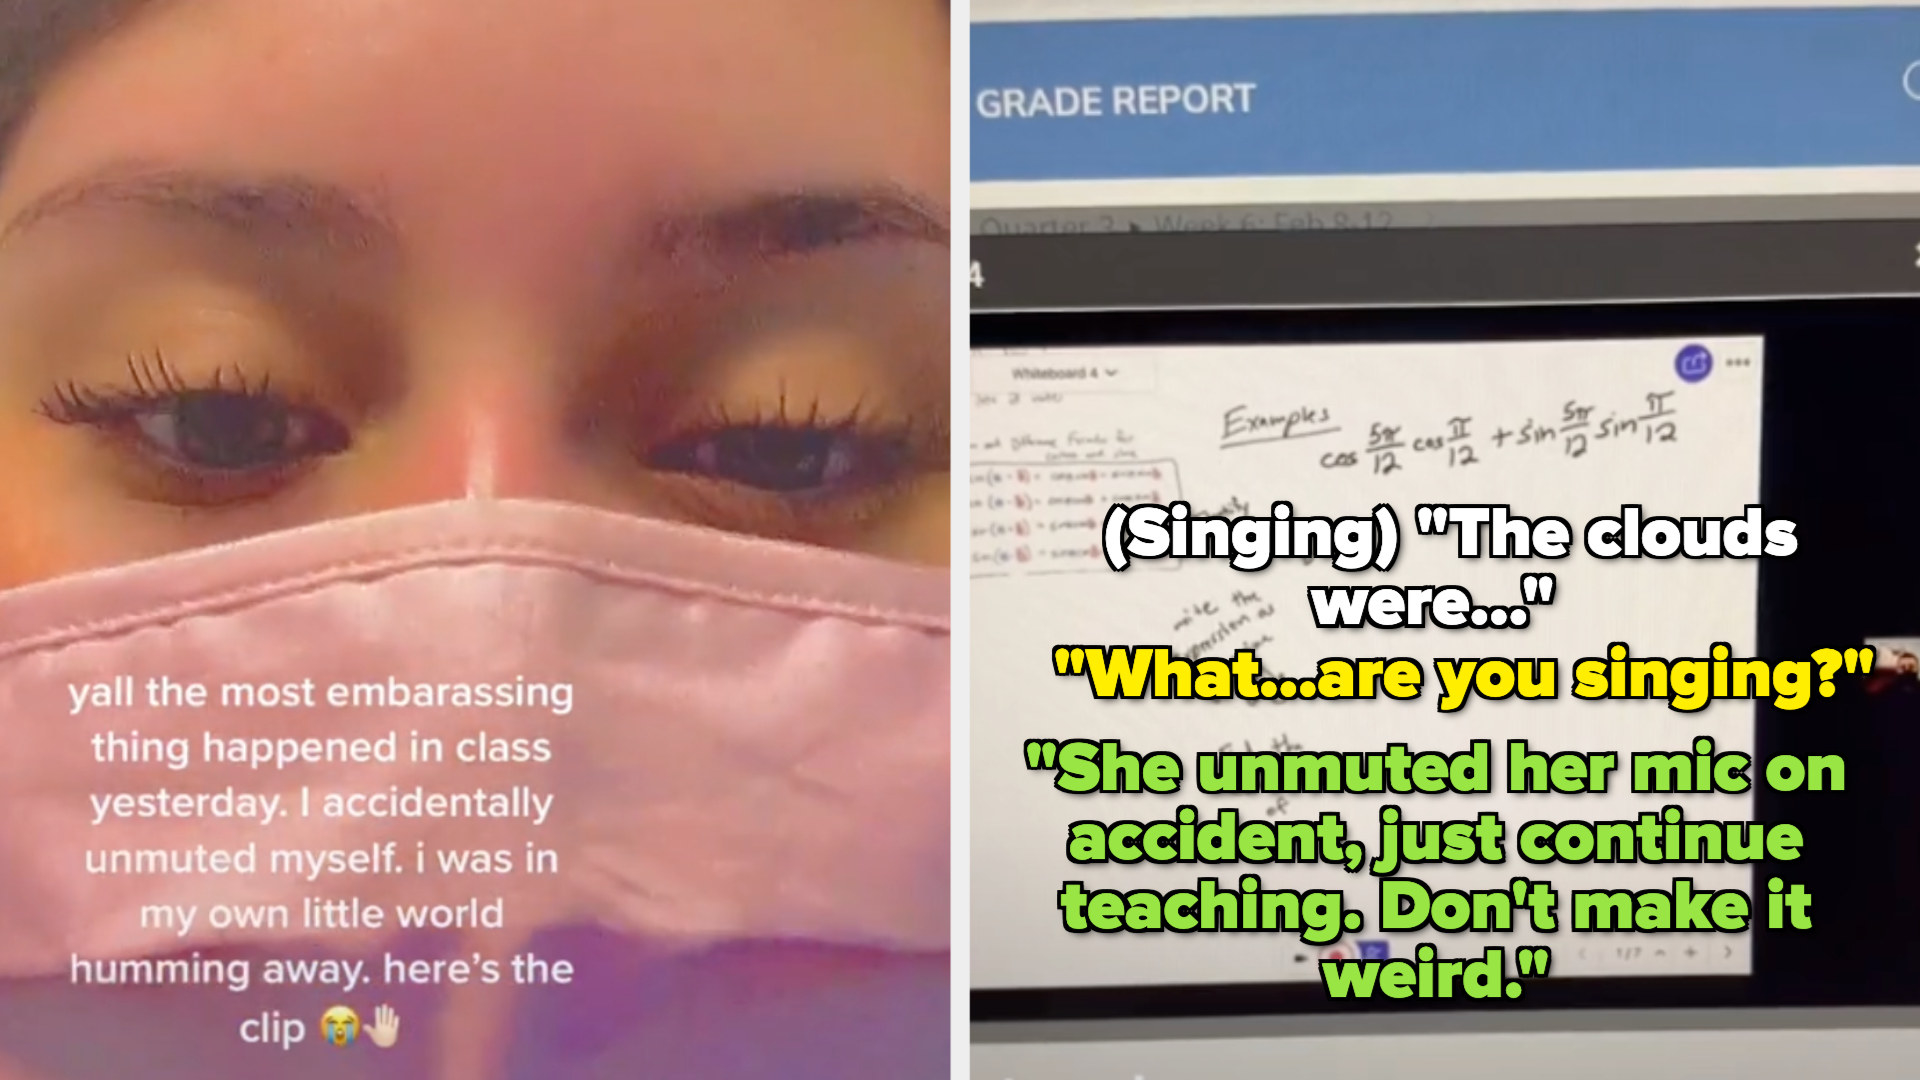 girl saying she was in her own world humming away in class, then the professor hearing it and asking if she&#x27;s singing; another student says to ignore her